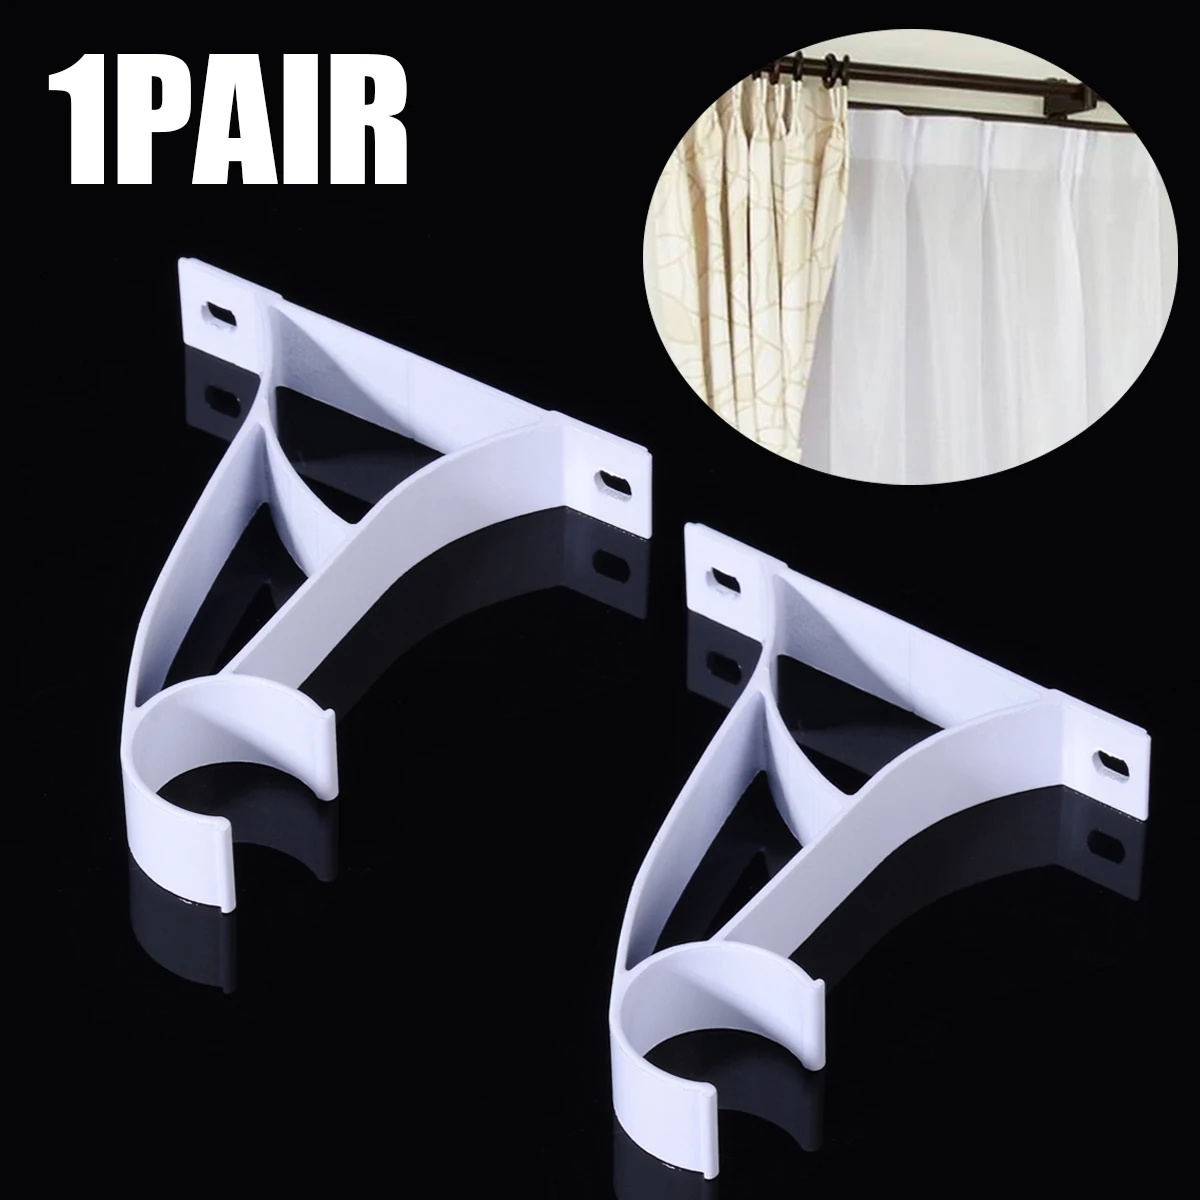 !1 Pair Hang Curtain Rod Holders Tap Right Into Window Frame Curtain Rod Bracket 